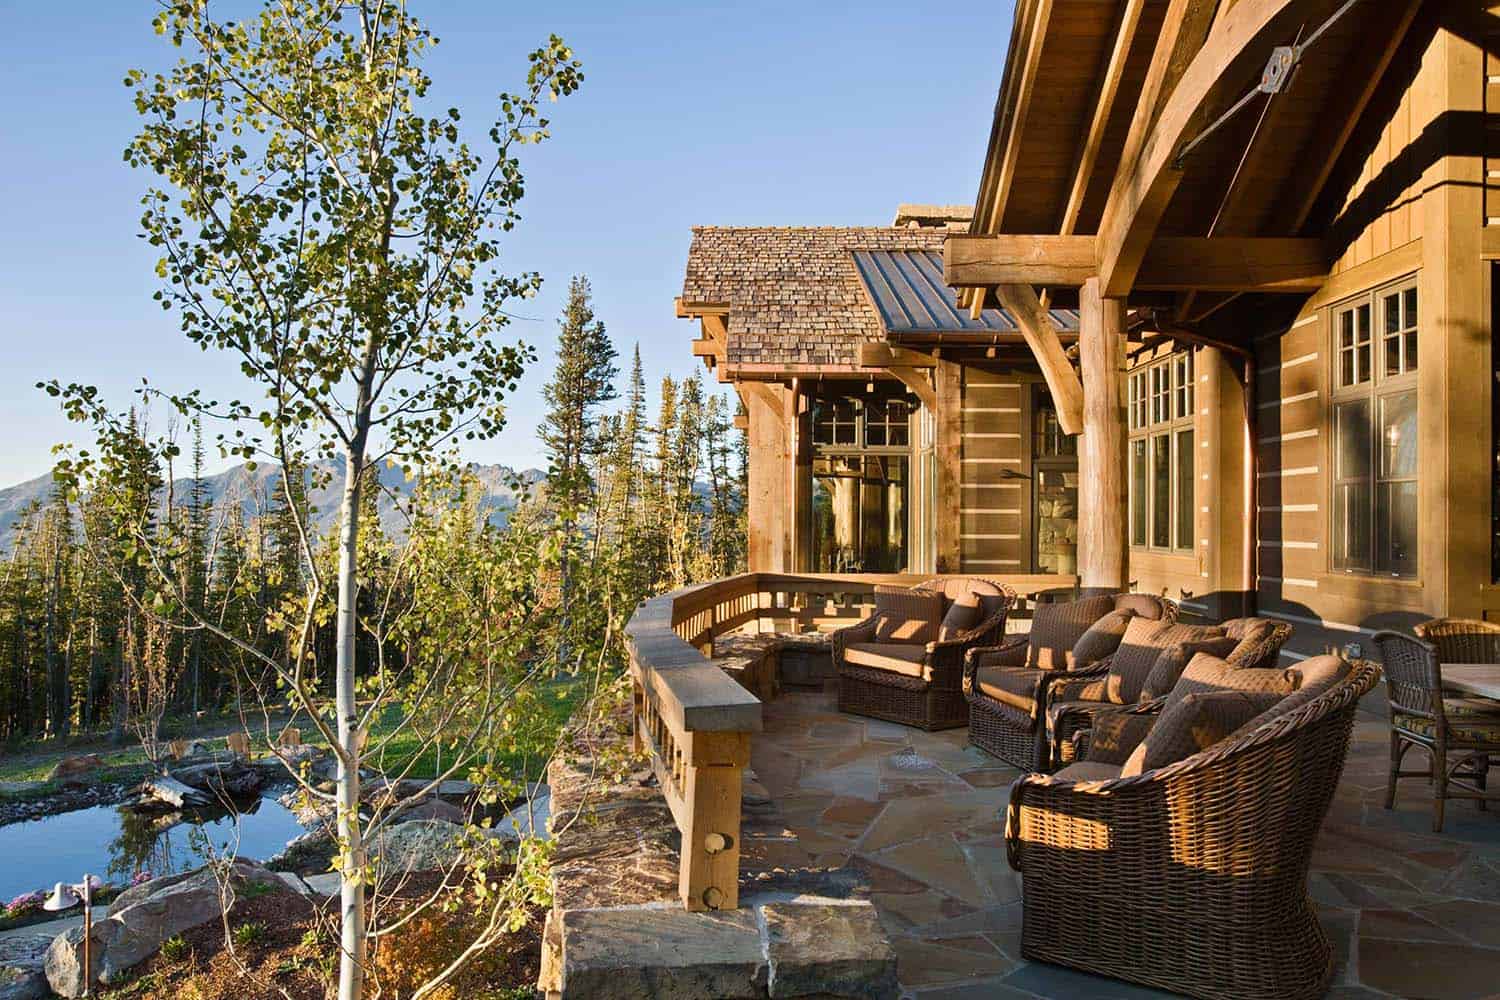 residence-rustic-exterior